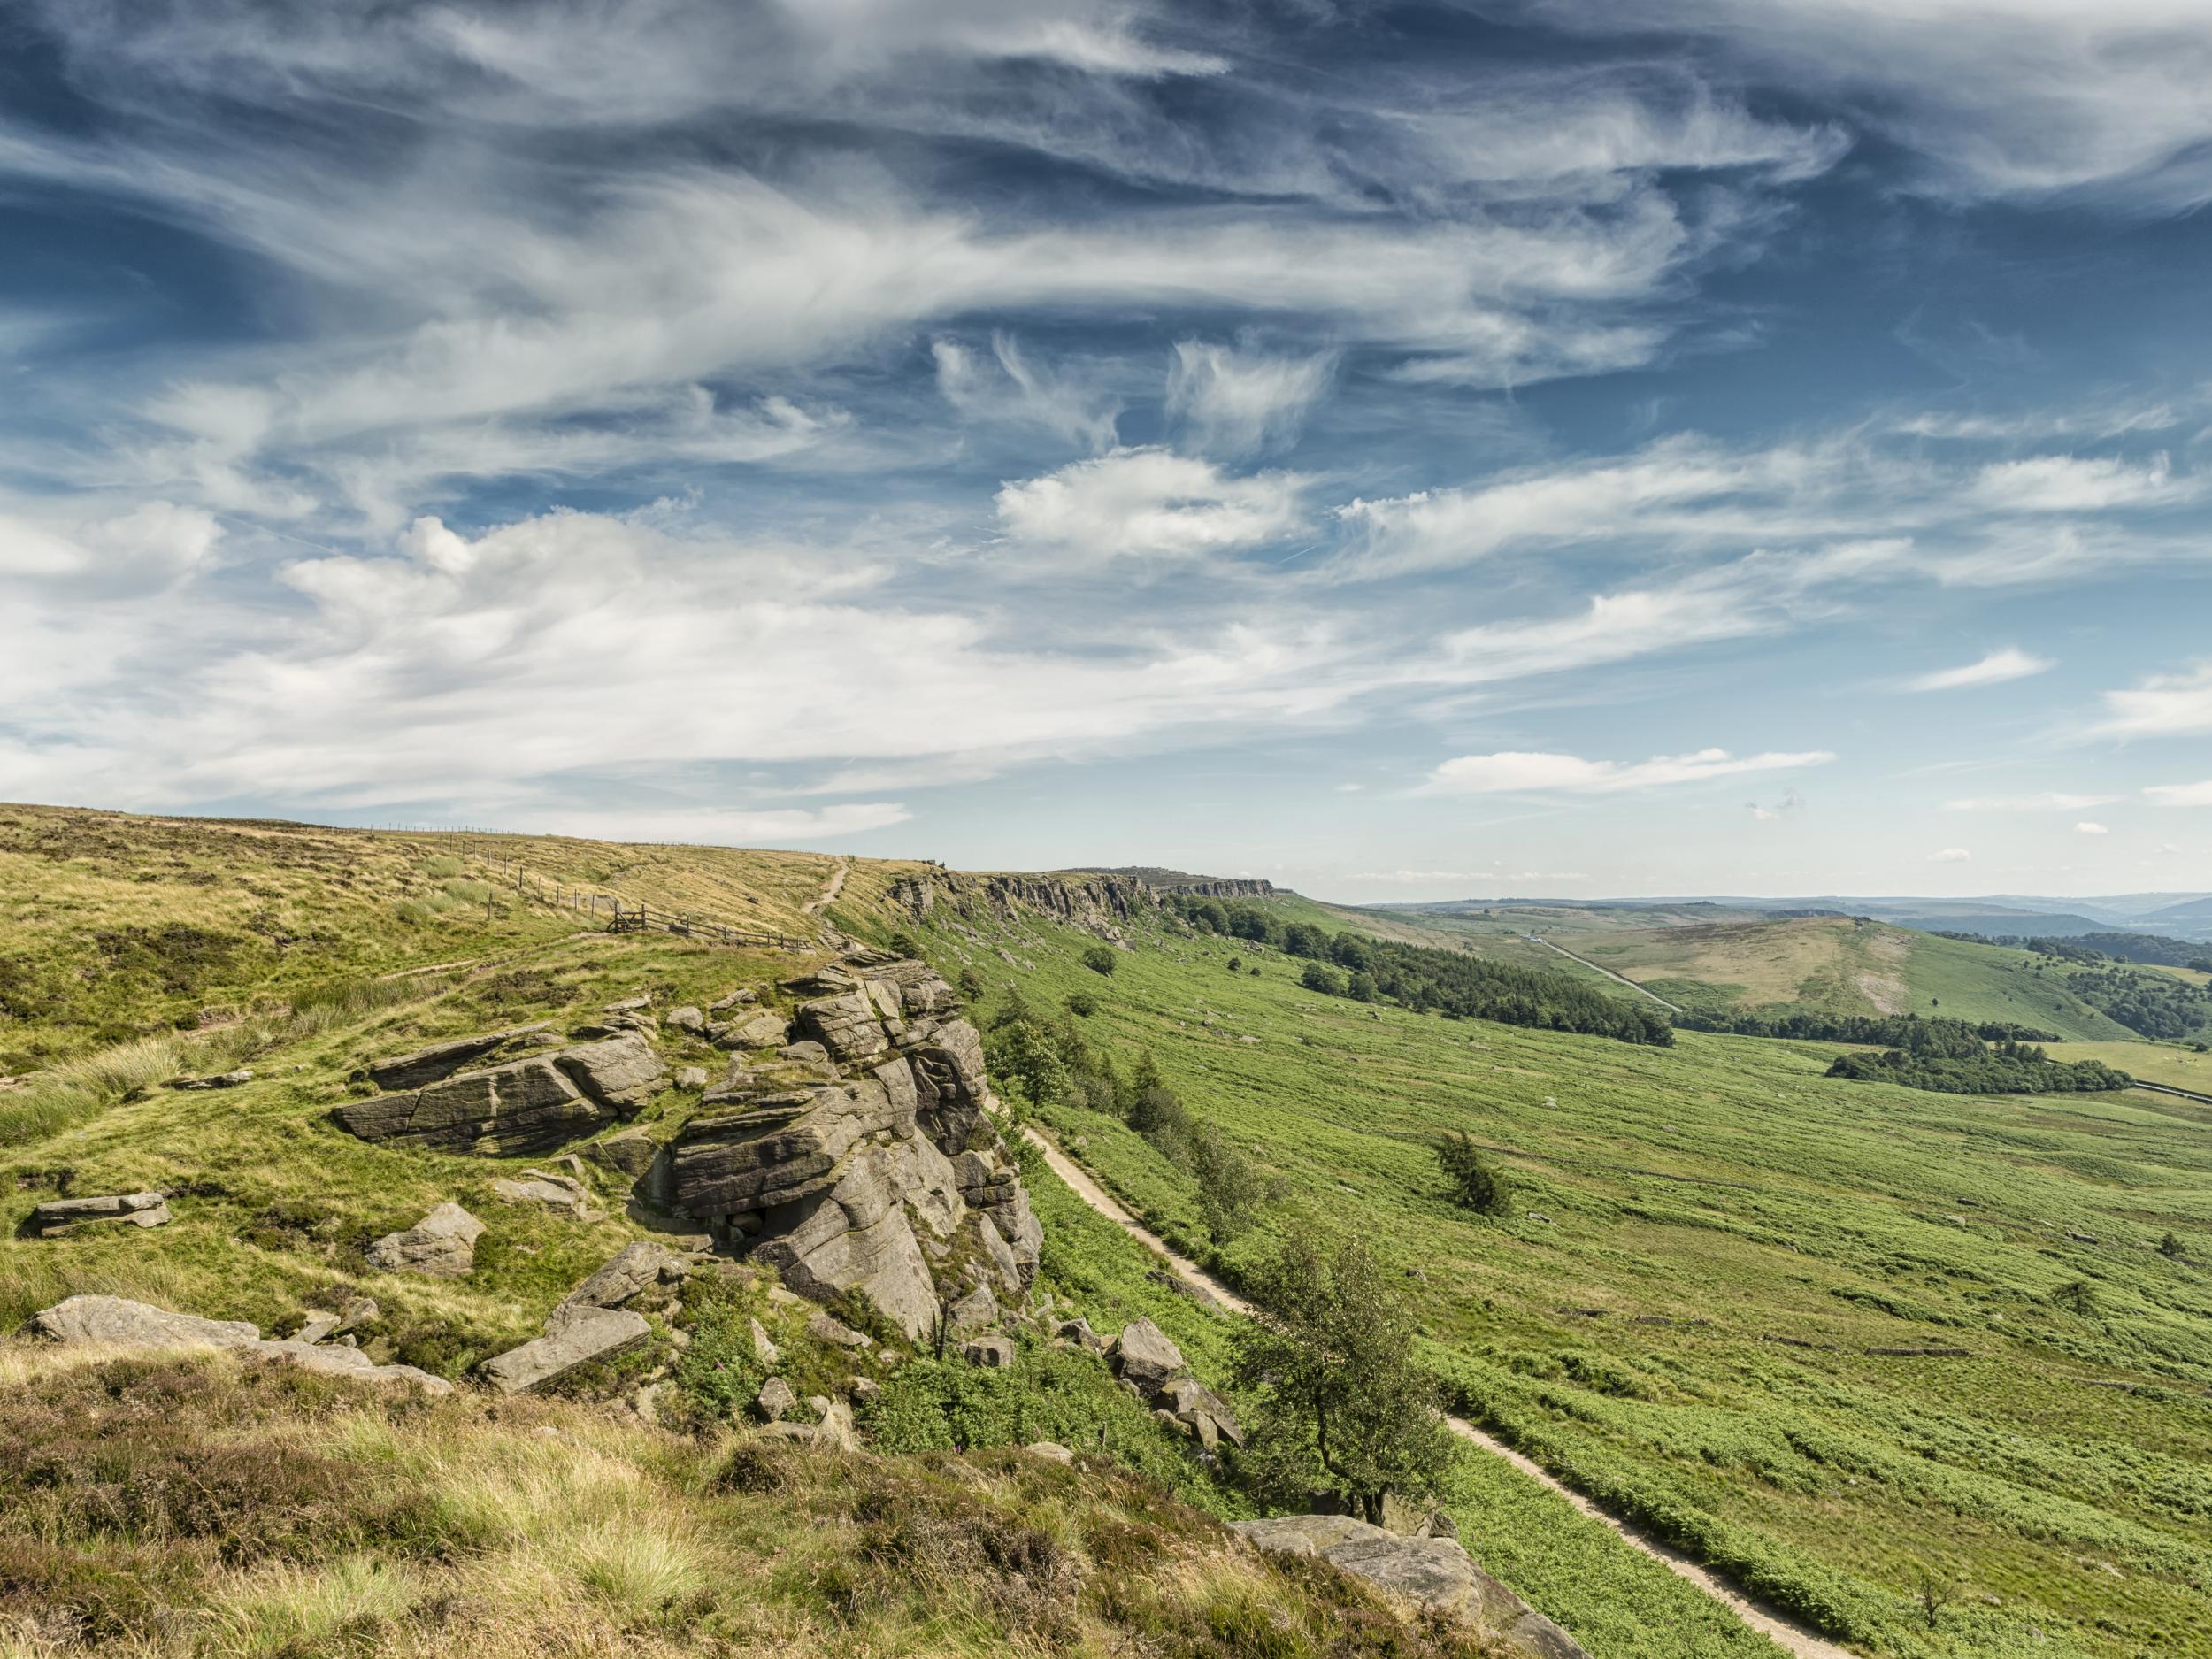 Charlotte Bronte is also thought to have been inspired by the peaks of Hathersage